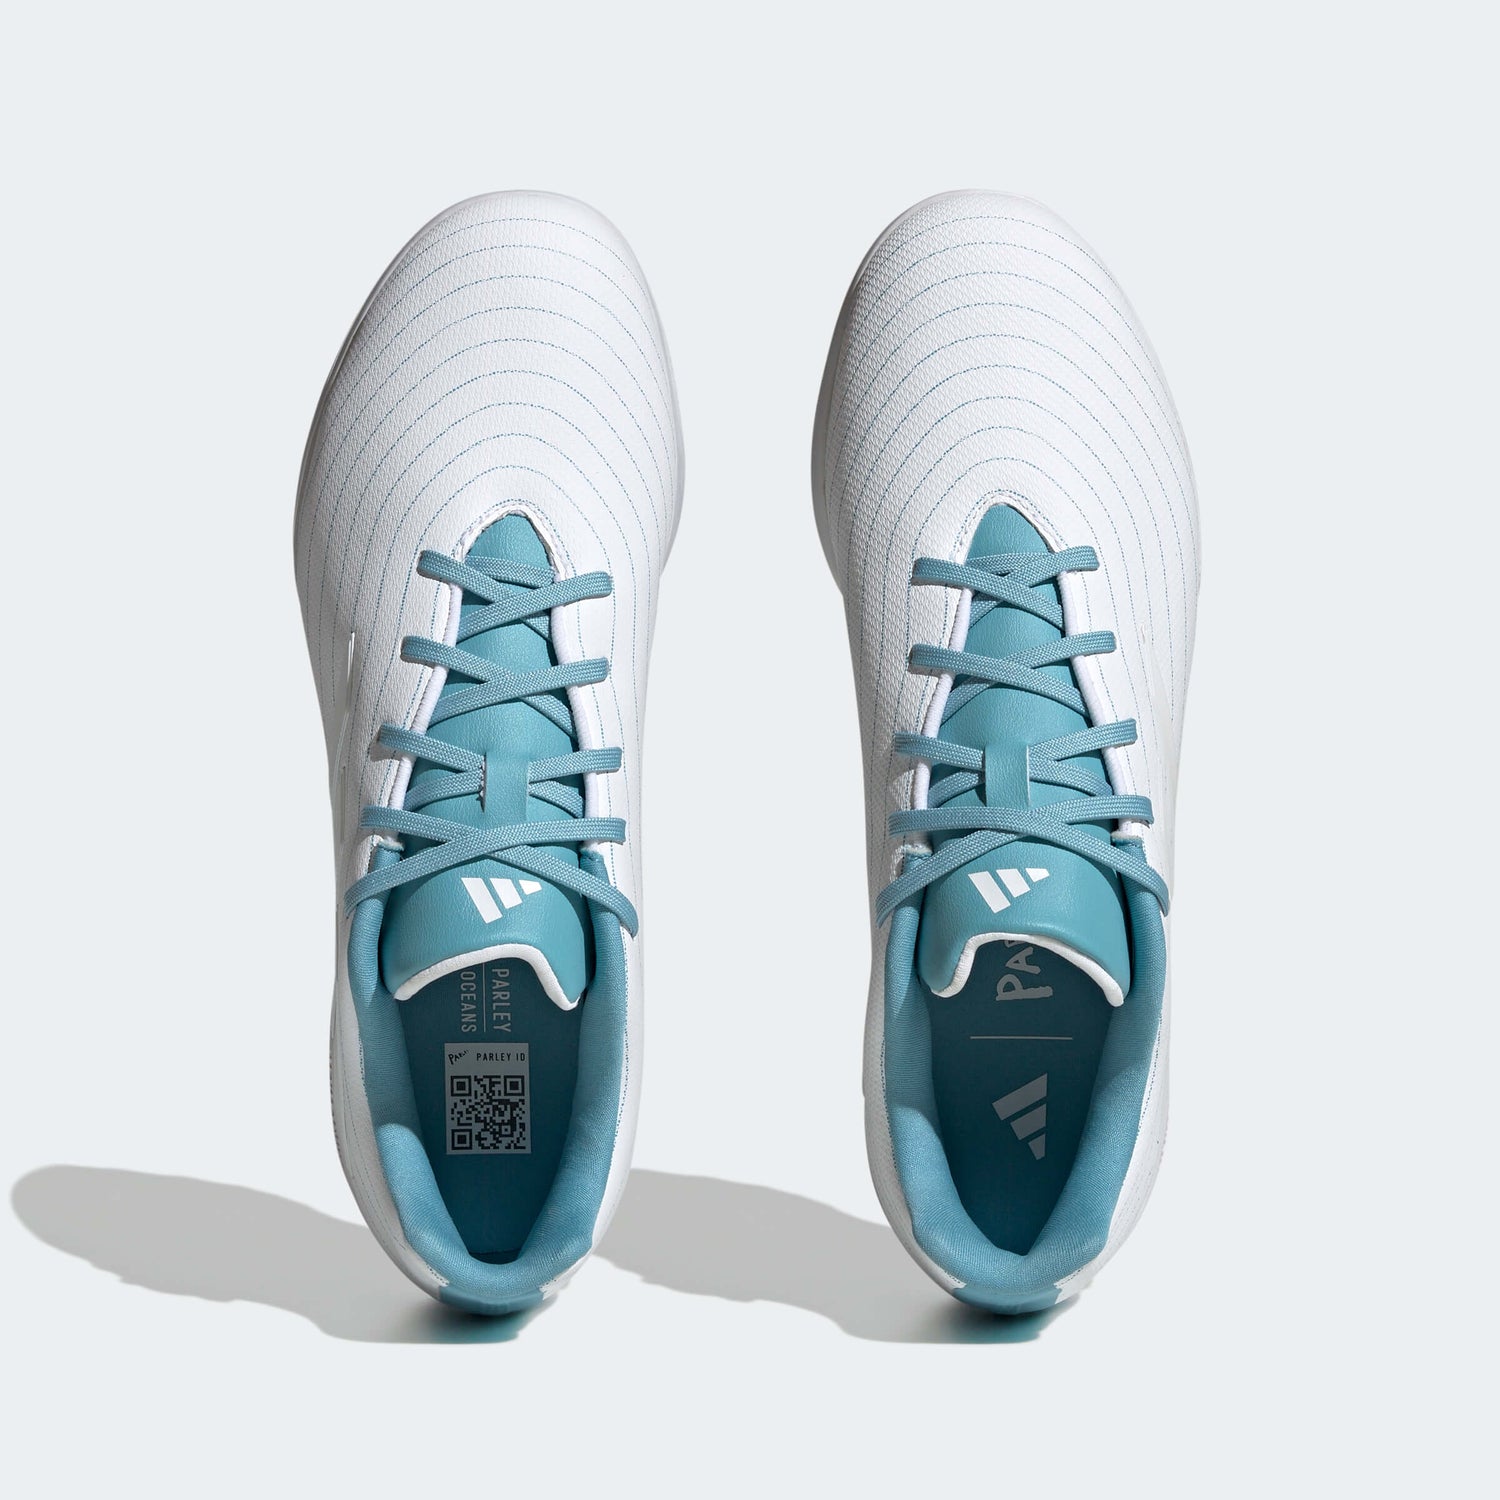 adidas Copa Pure .3 Turf - Parley Pack (SP23) (Pair - Top)